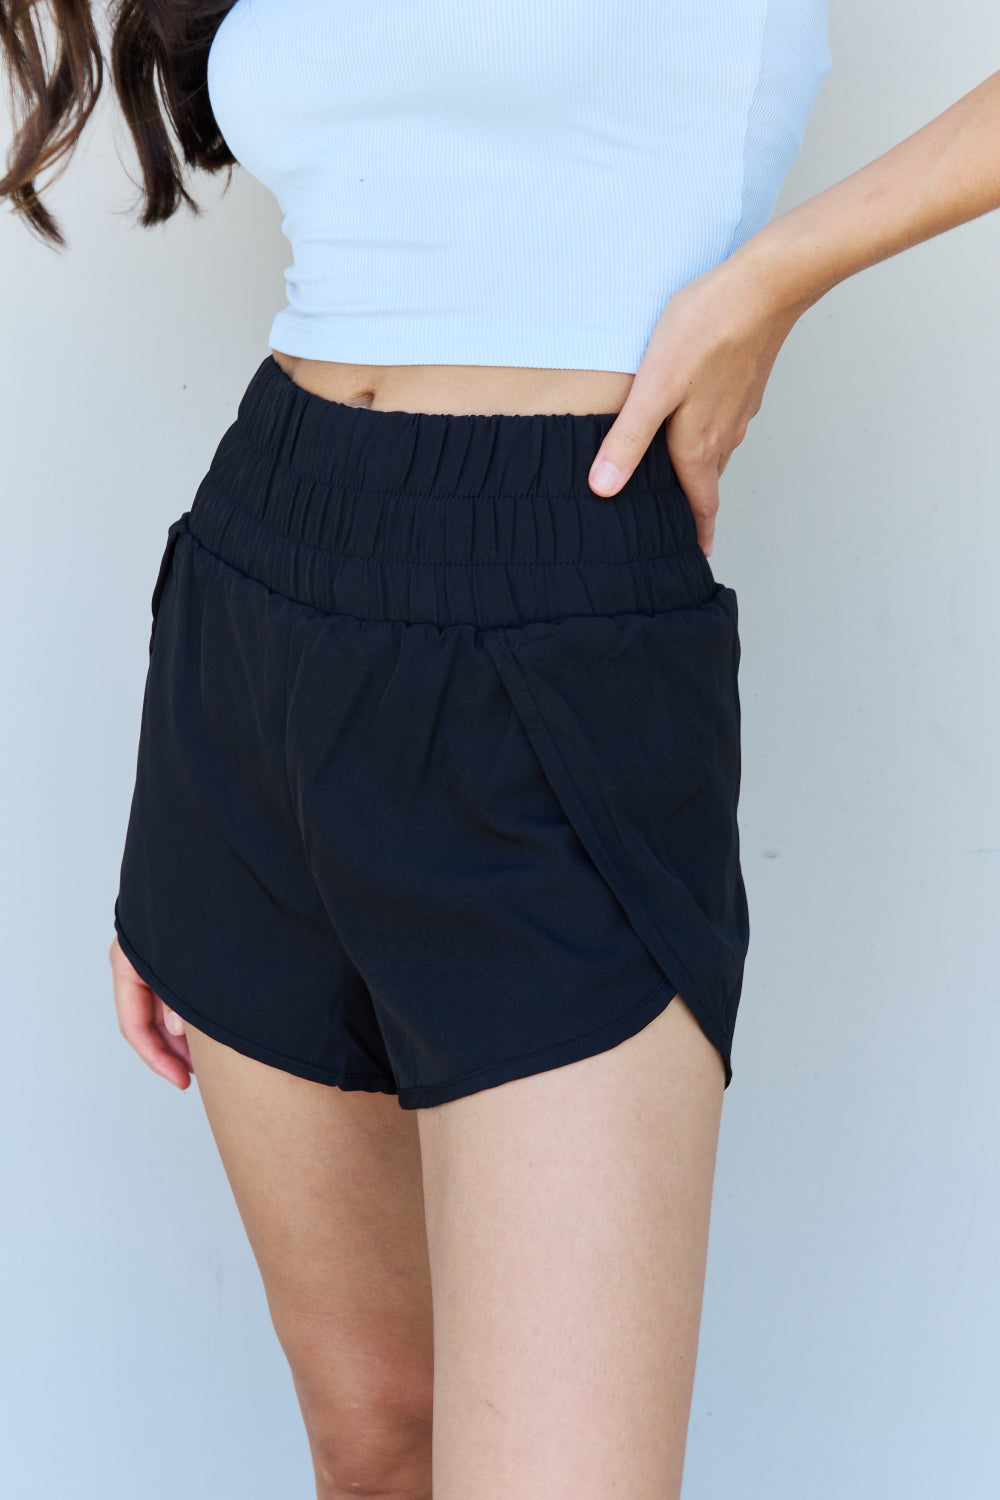 Ninexis Stay Active High Waistband Active Shorts in Black